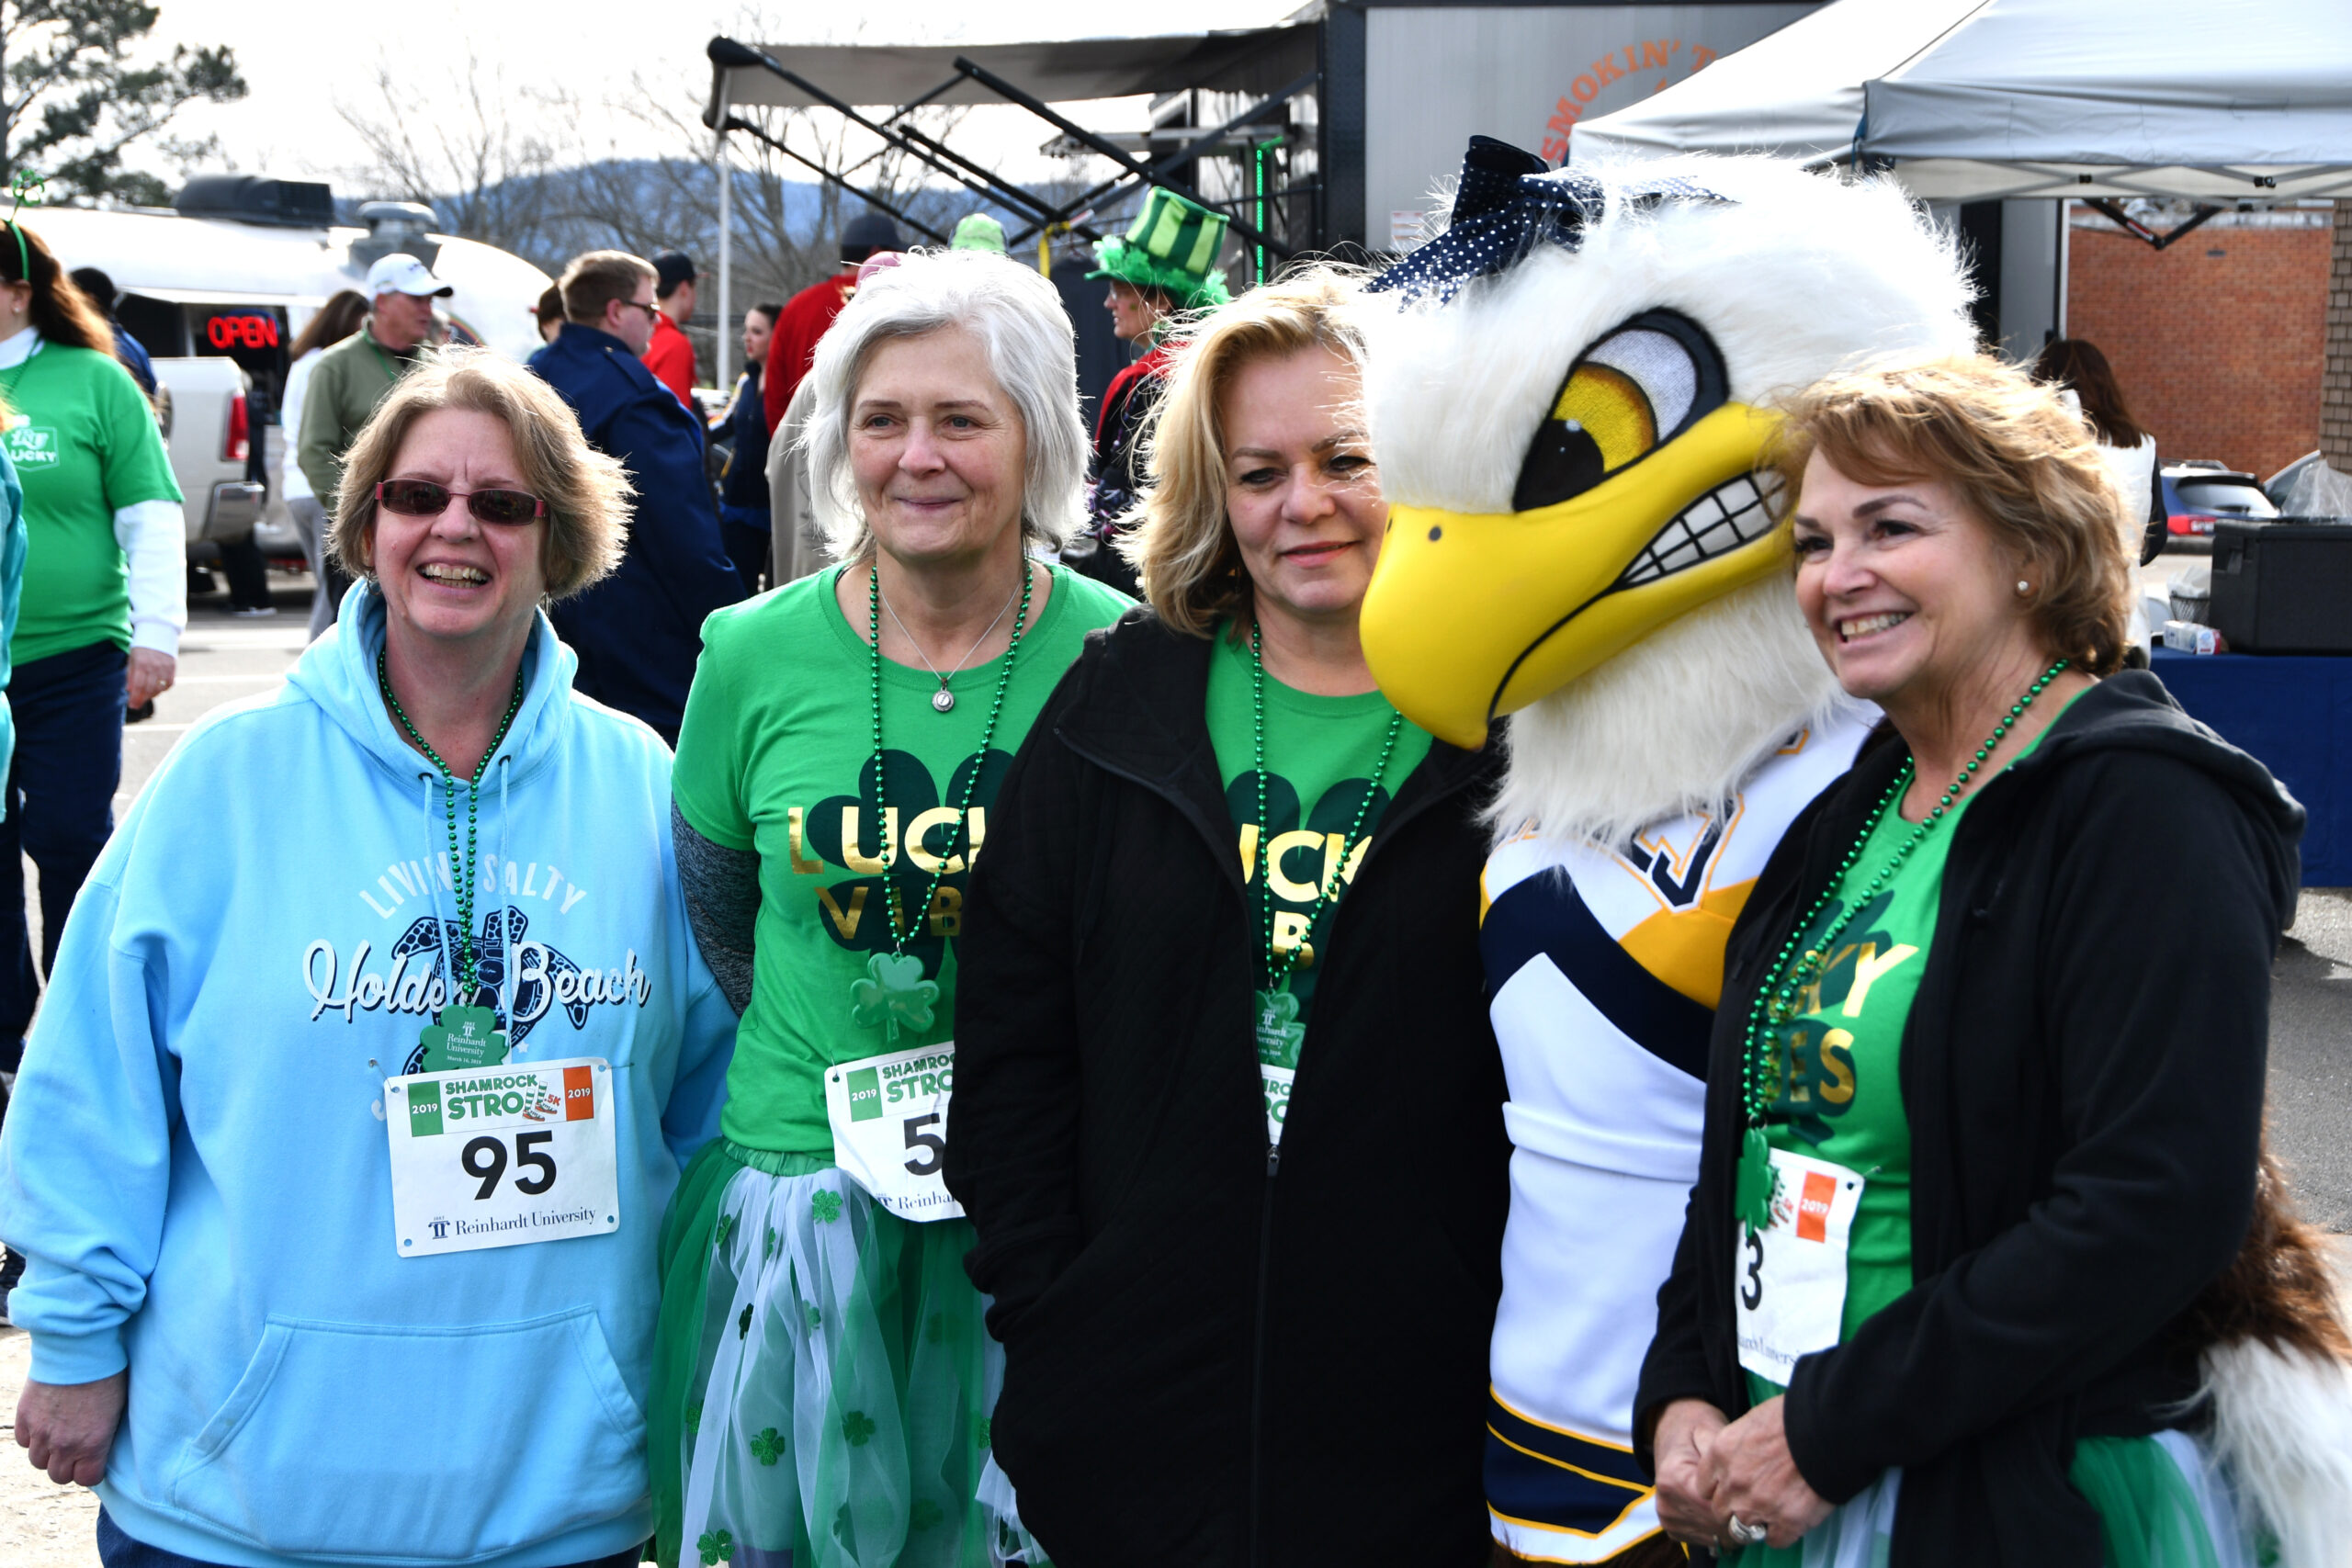 Three race participants pose with the Lady Soar eagle mascot